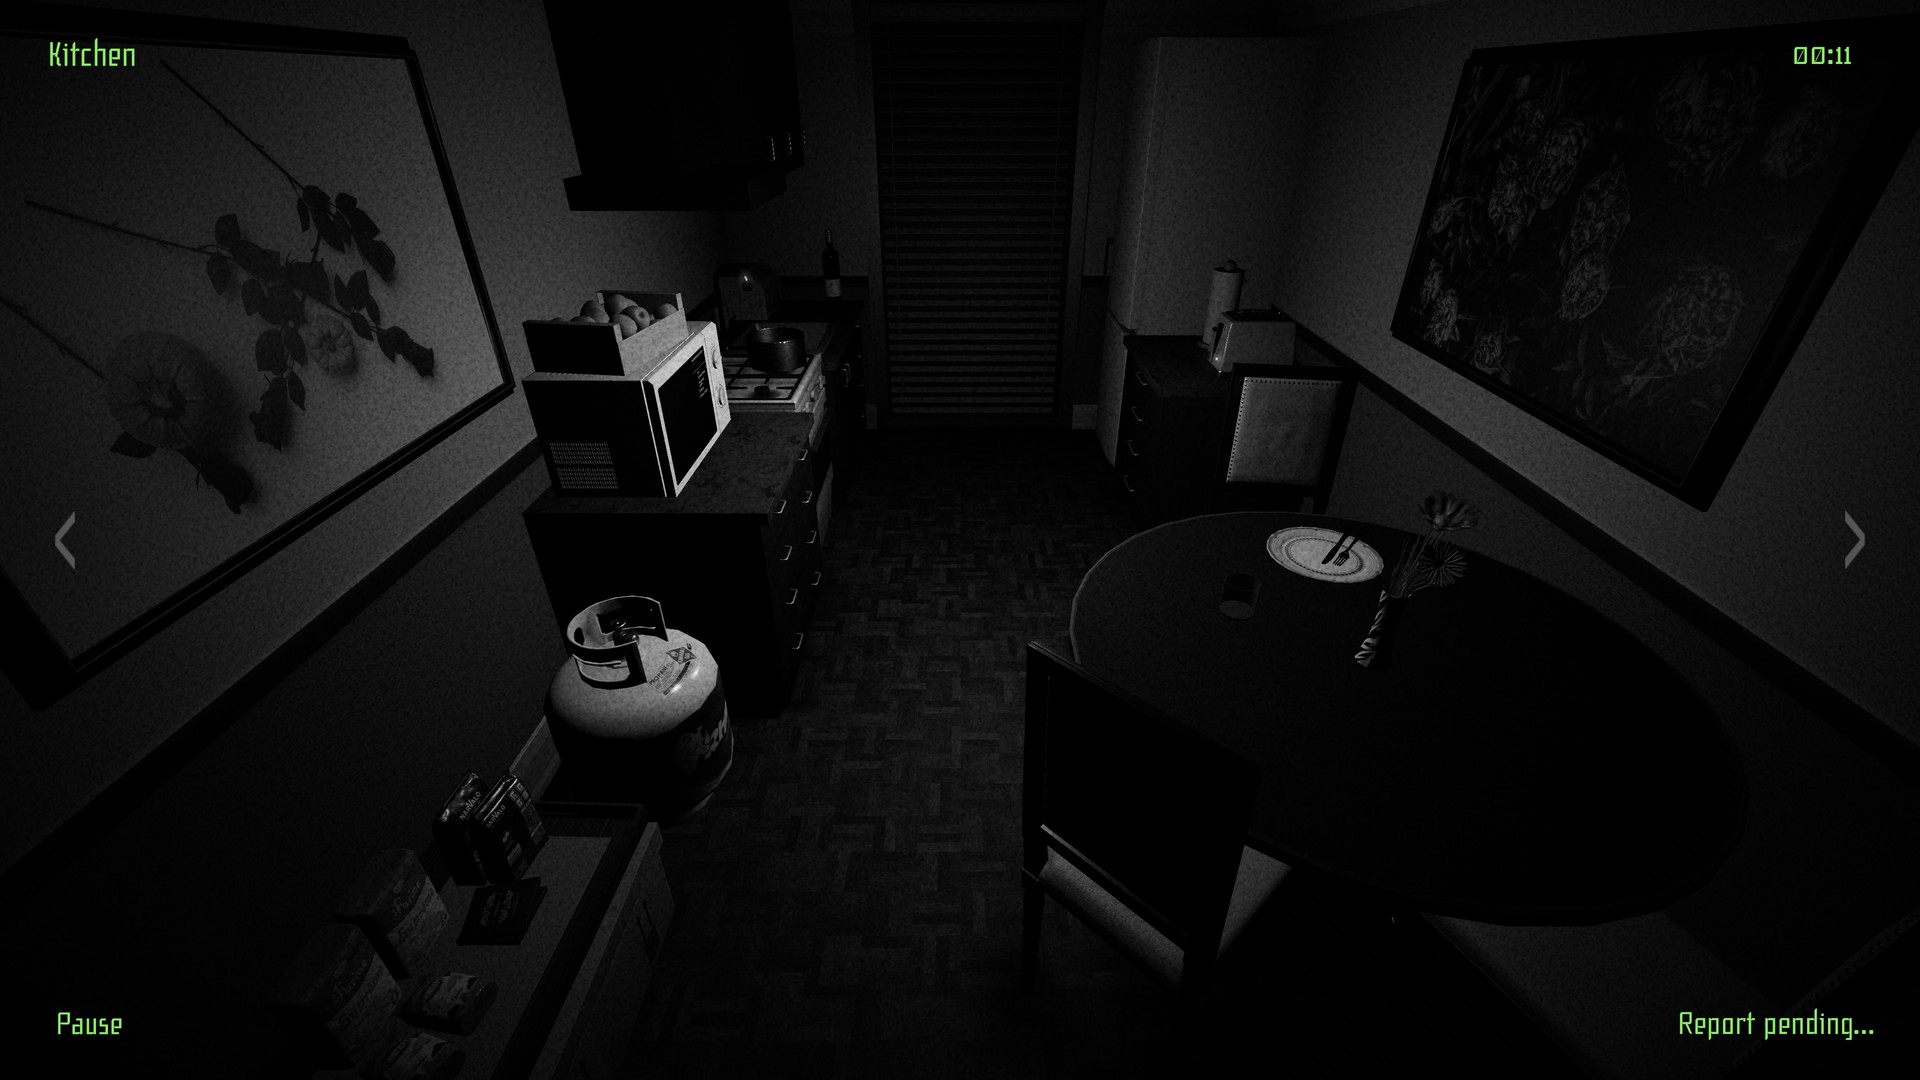 Alternate Watch is a horror game based of I'm on Observation Duty